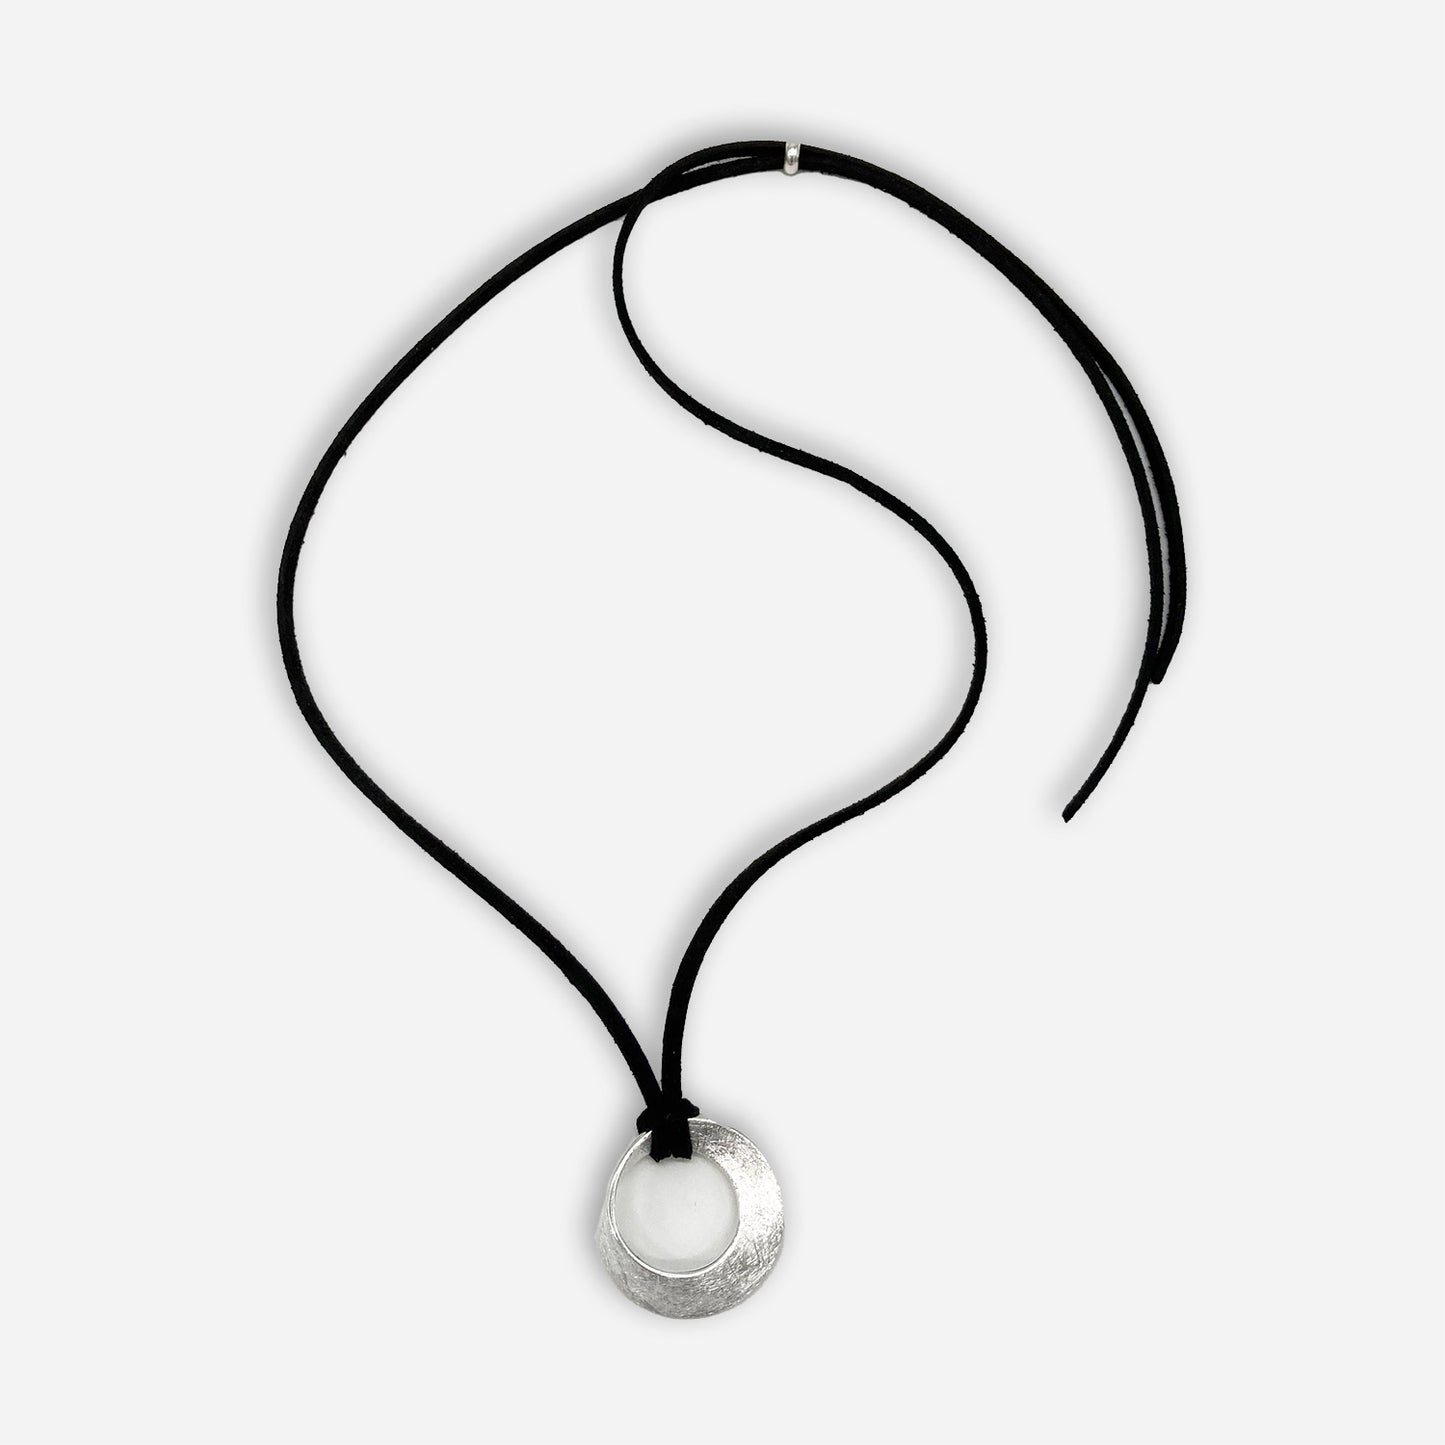 Mobius Circle Pendant in Silver on Adjustable Slide - Textured finish